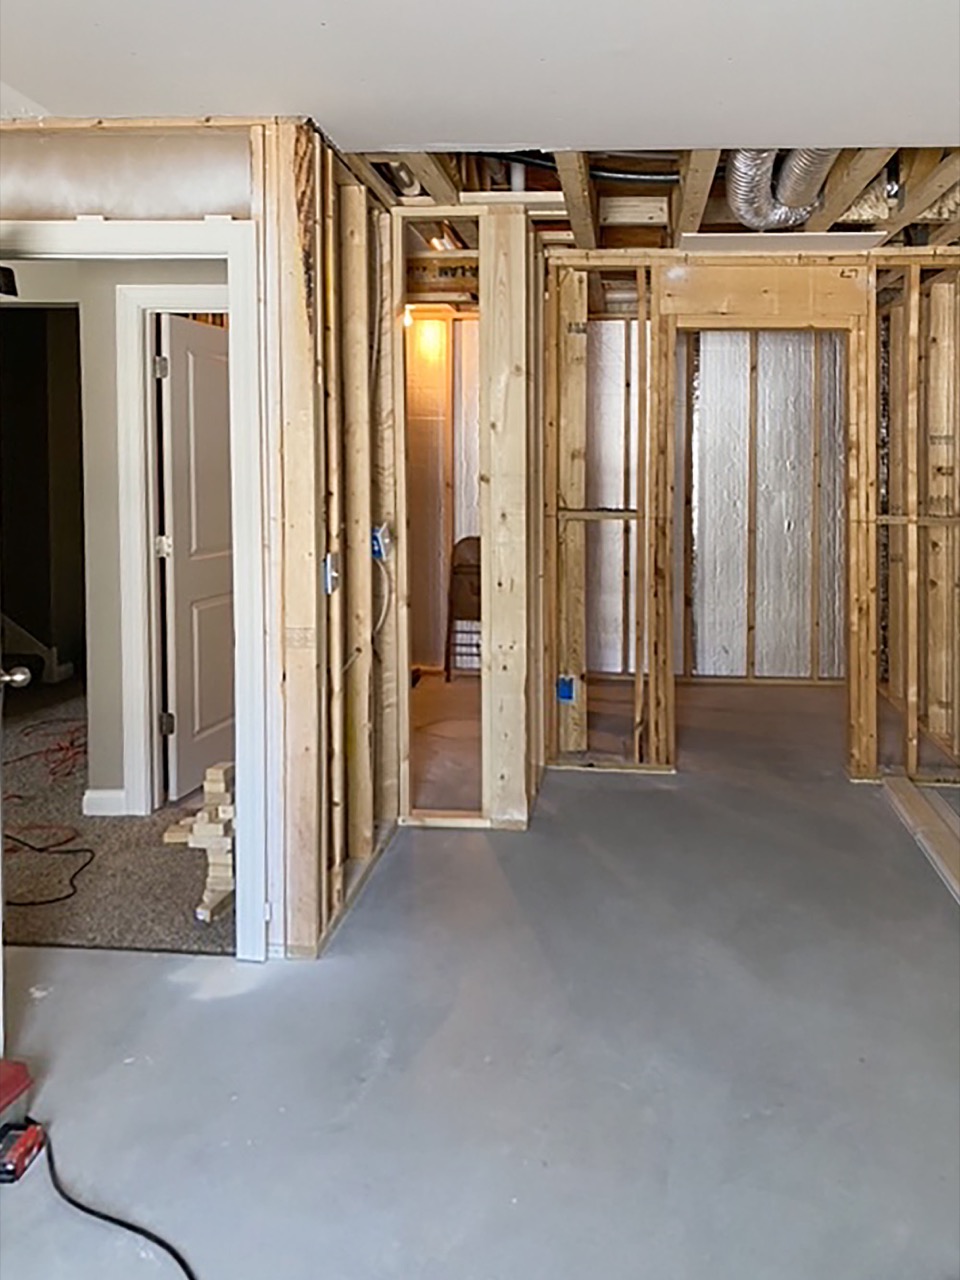 A picture of a houselift basement being remodeled